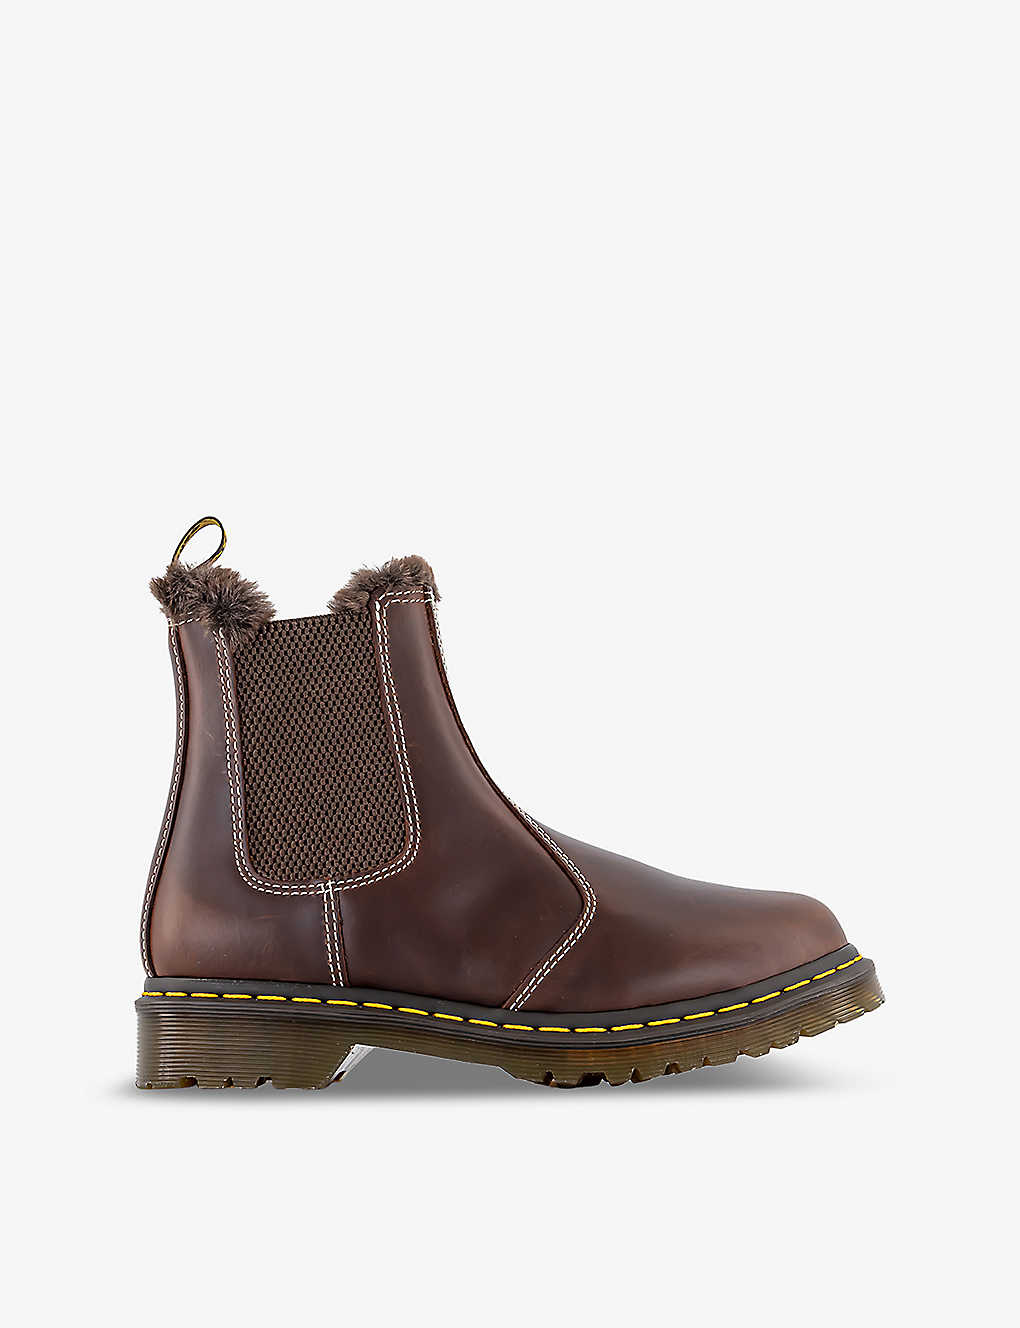 Dr. Martens' Dr. Martens Womens Dark Brown 2976 Leonore Faux Fur-lined Leather Chelsea Boots